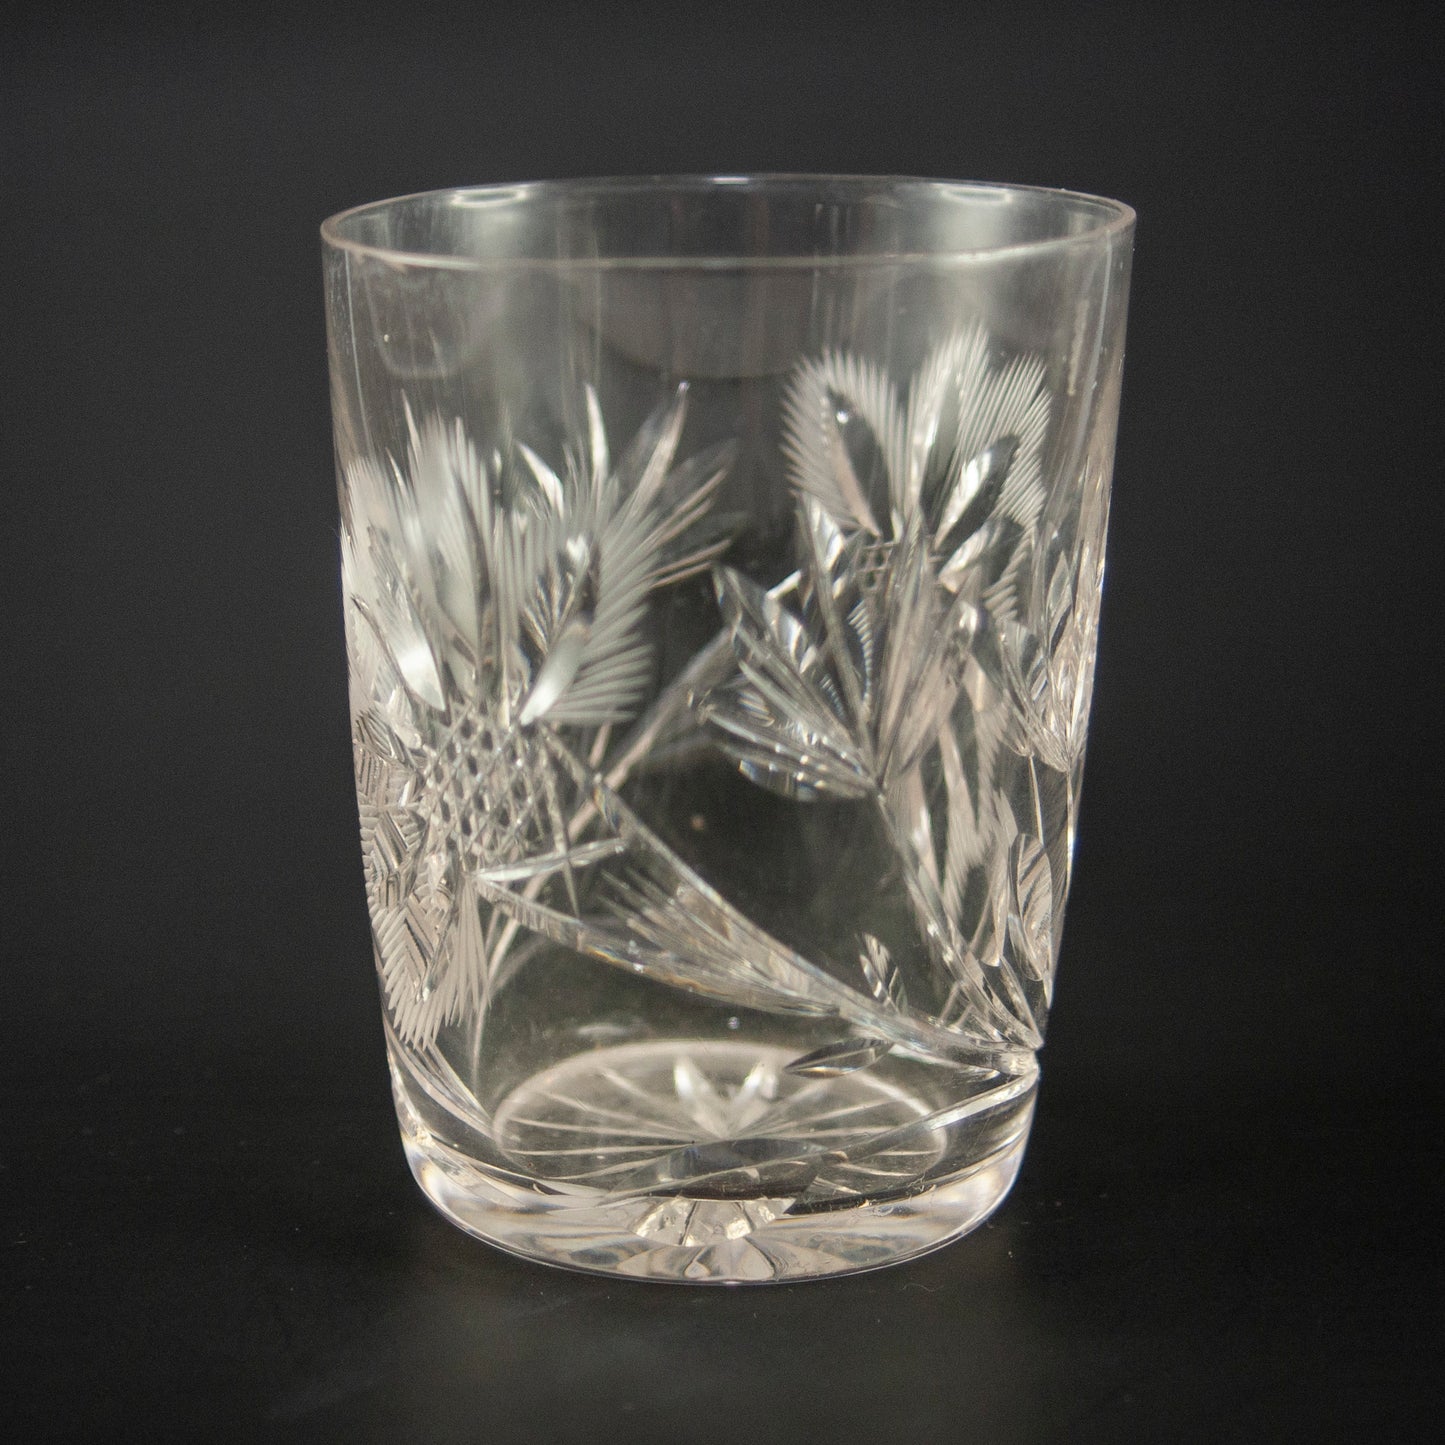 Glass with Wheat Pattern